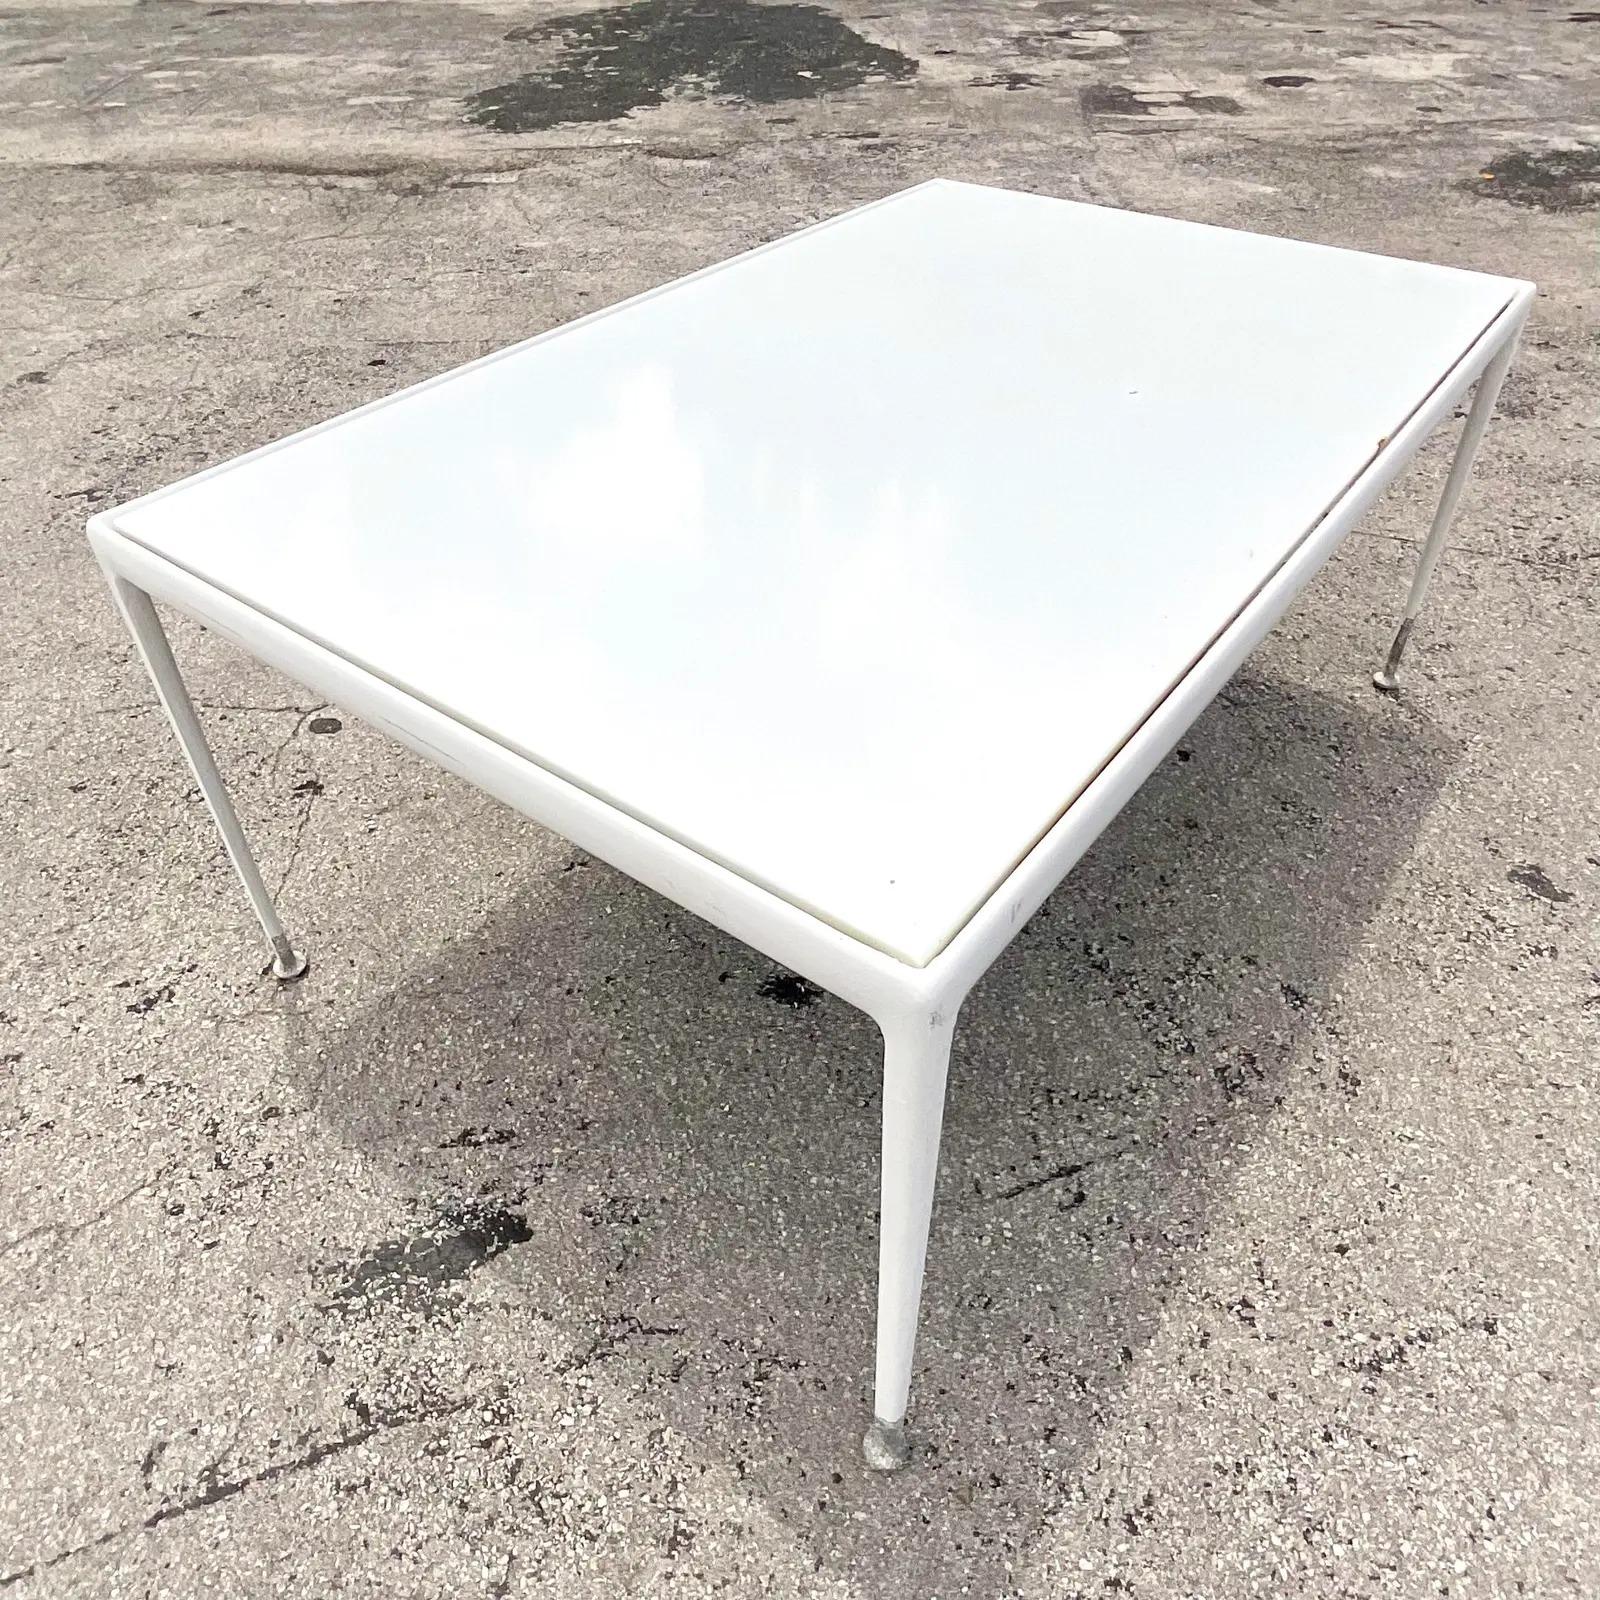 Fabulous vintage Midcentury outdoor dining table. The large rectangle version. Beautiful cast aluminum from the 1966 Aluminum Leisure Series. Unmarked. Acquired from a Palm Beach estate.

The table is in great structural condition. Minor scuffs